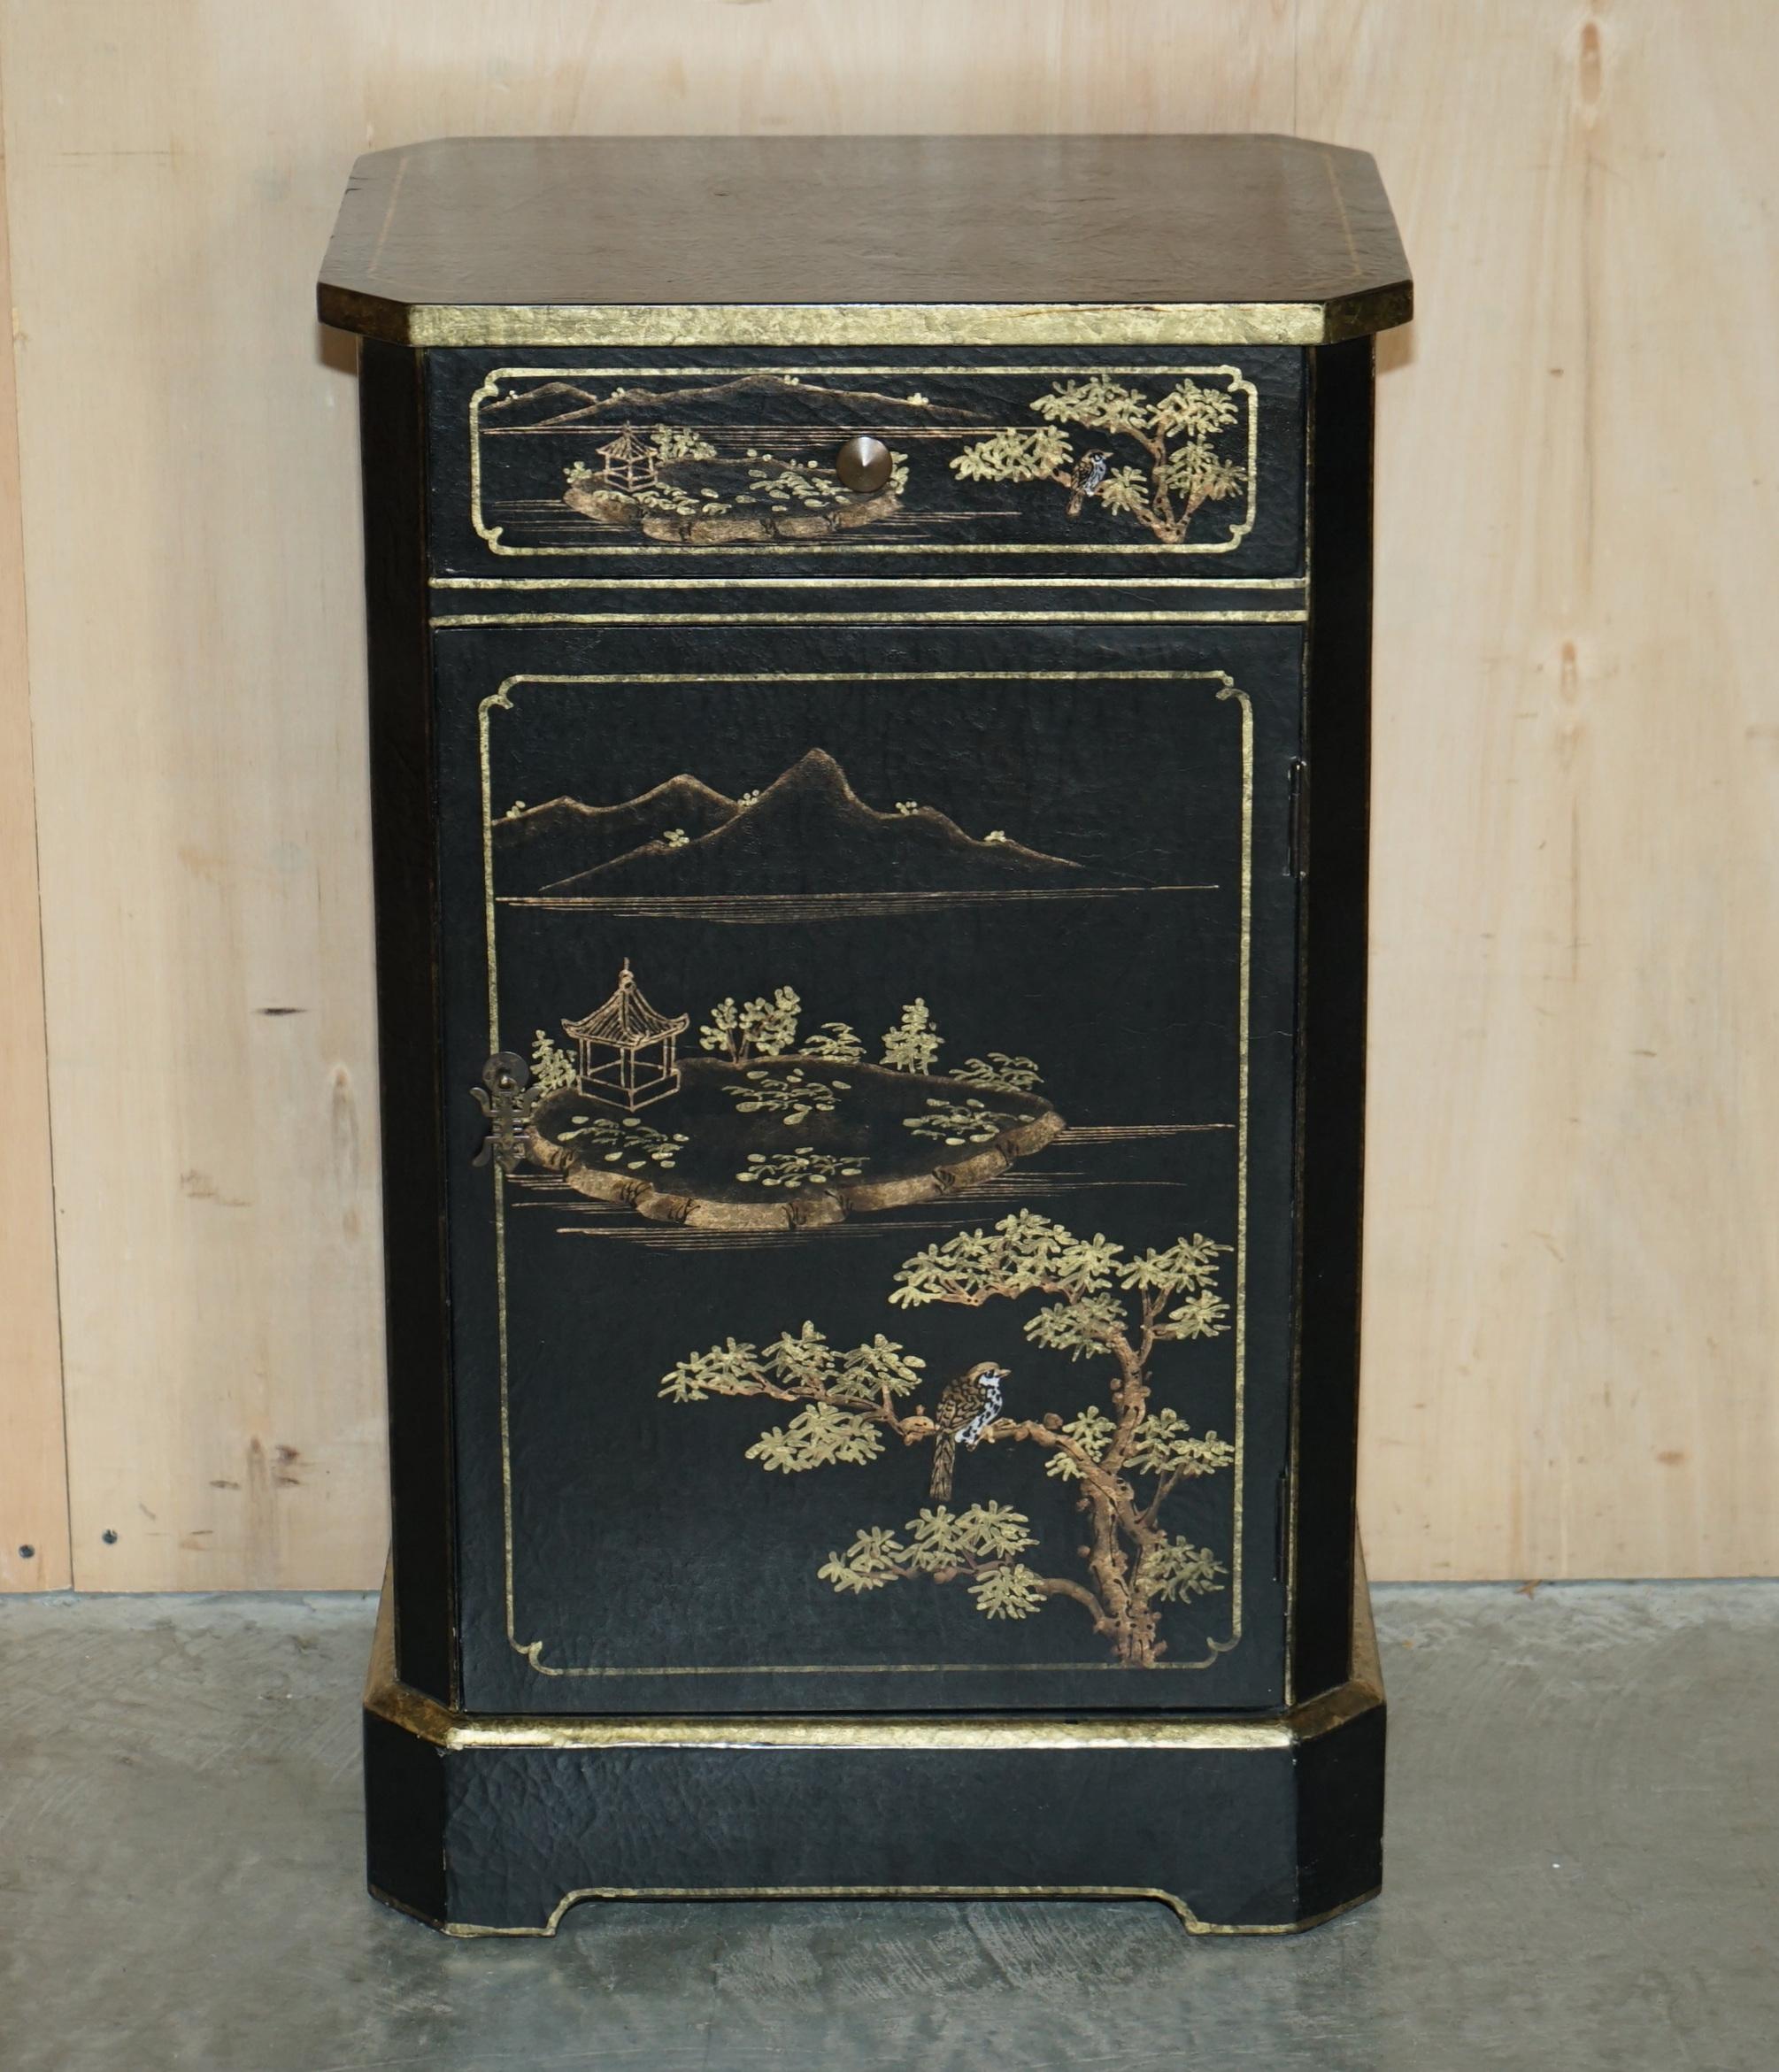 Royal House Antiques

Royal House Antiques is delighted to offer for sale this lovely vintage circa 1940's hand painted and lacquered Chinese chinoiserie / Japanned ebonised side table cabinet 

Please note the delivery fee listed is just a guide,